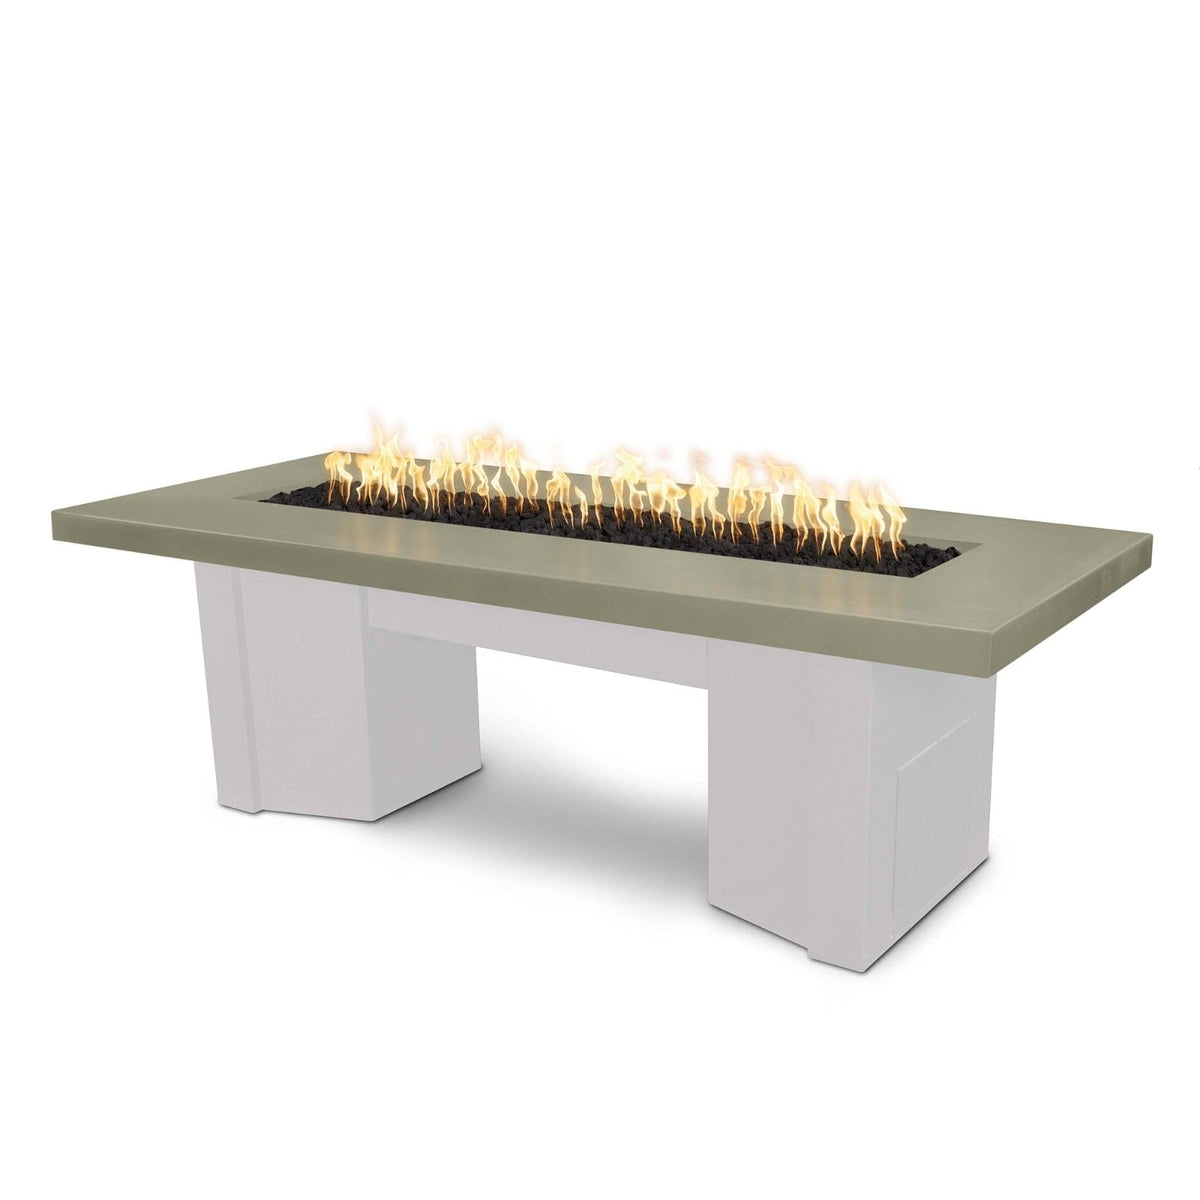 The Outdoor Plus Fire Features Ash (-ASH) / White Powder Coated Steel (-WHT) The Outdoor Plus 78&quot; Alameda Fire Table Smooth Concrete in Liquid Propane - Flame Sense System with Push Button Spark Igniter / OPT-ALMGFRC78FSEN-LP